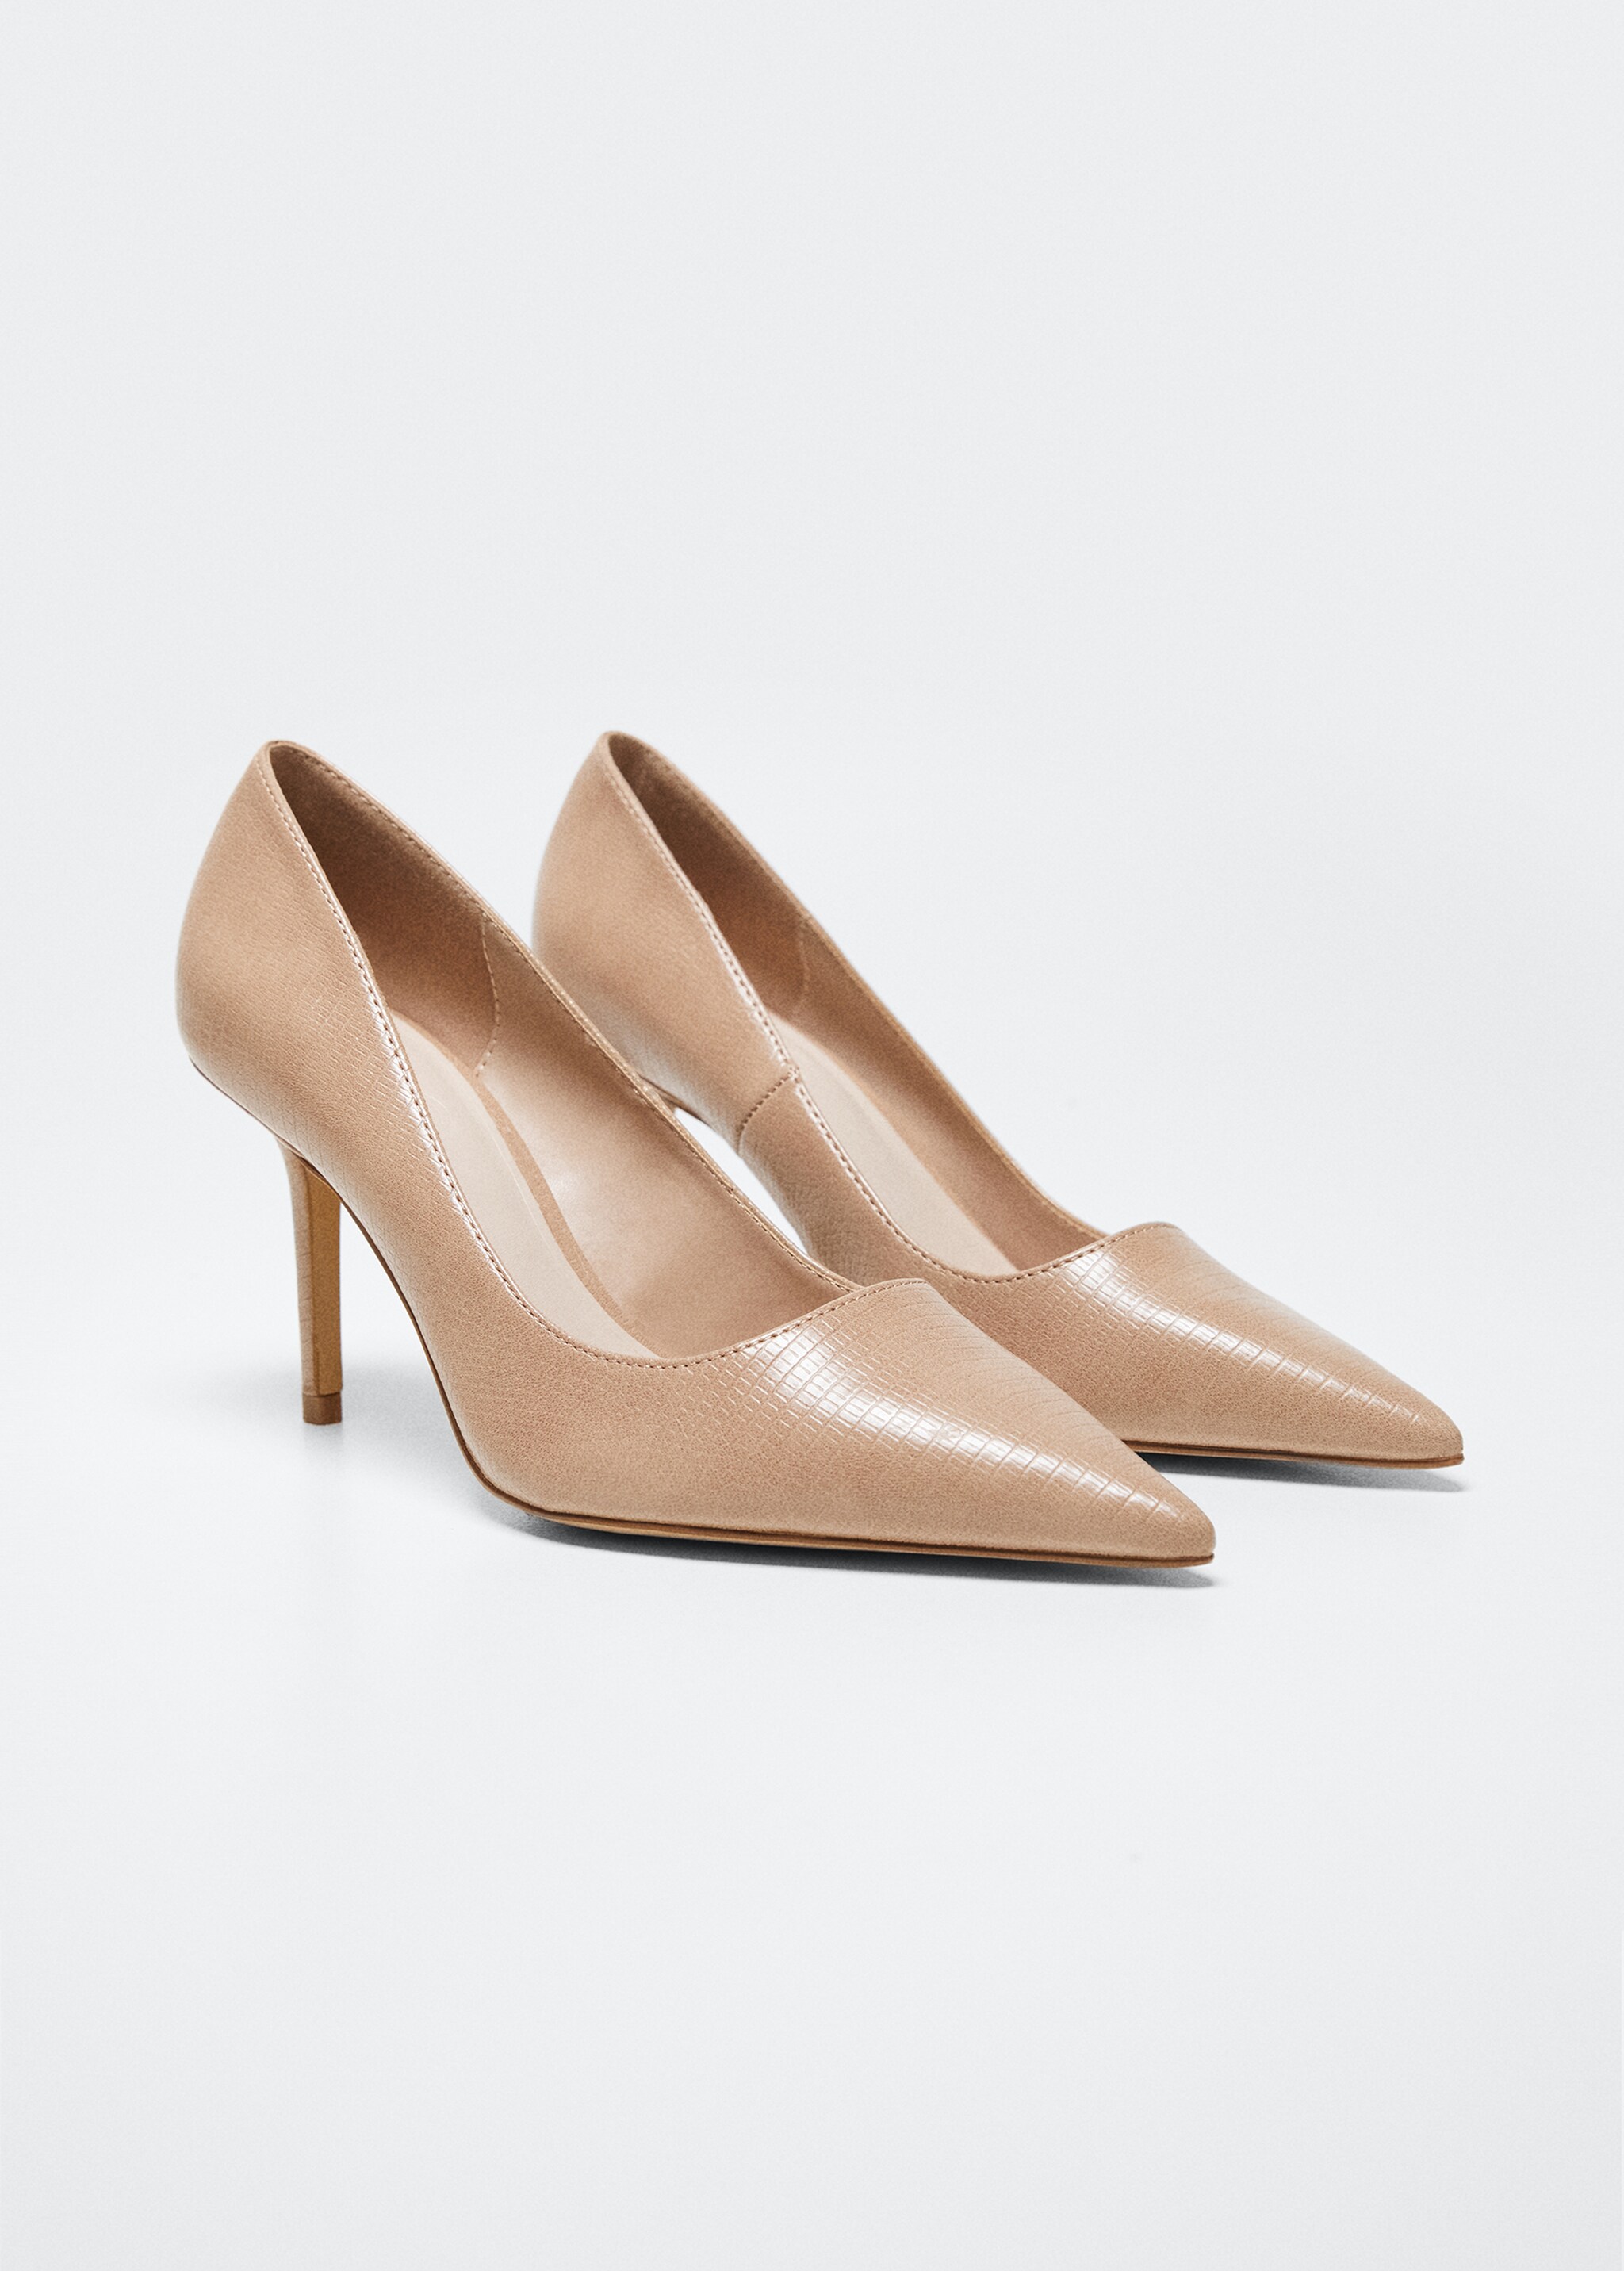 Pointed toe pumps - Details of the article 8